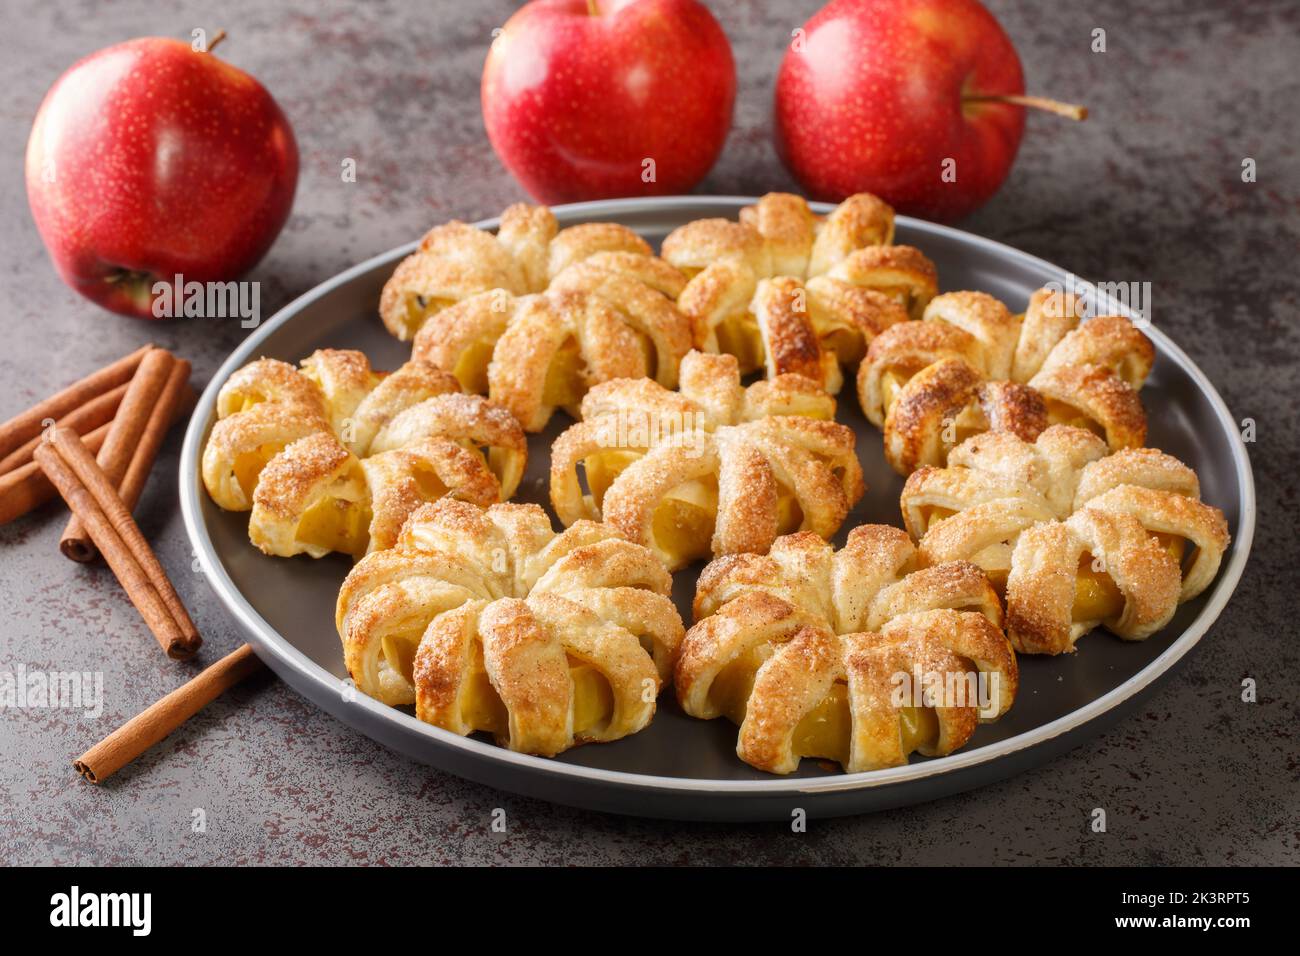 baked apples wrapped in puff pastry and sprinkled with sugar and cinnamon close-up in a plate on the table. horizontal Stock Photo